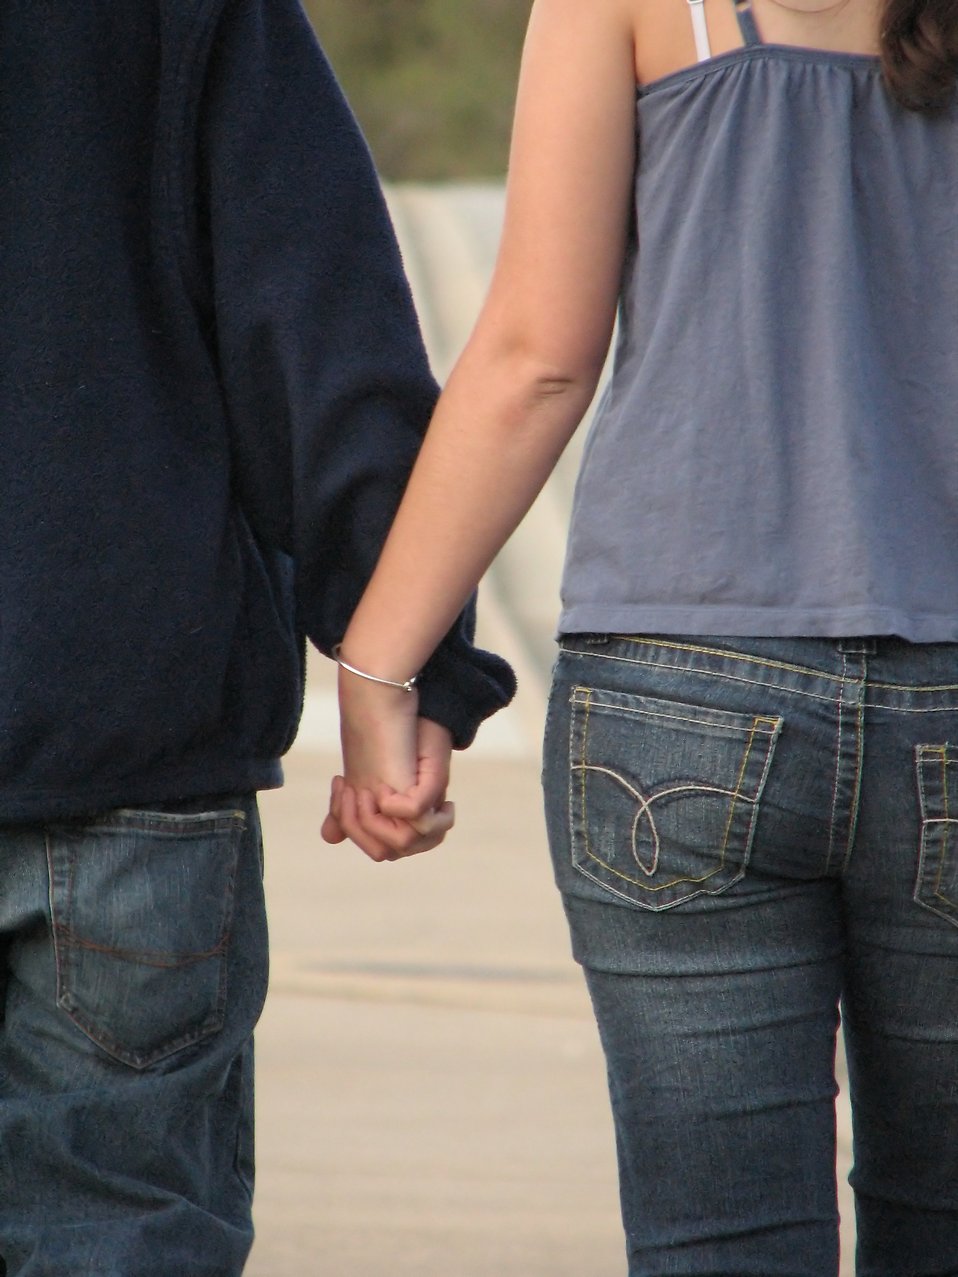 Close-up of a teen boy and girl holding hands. : Free Stock Photos